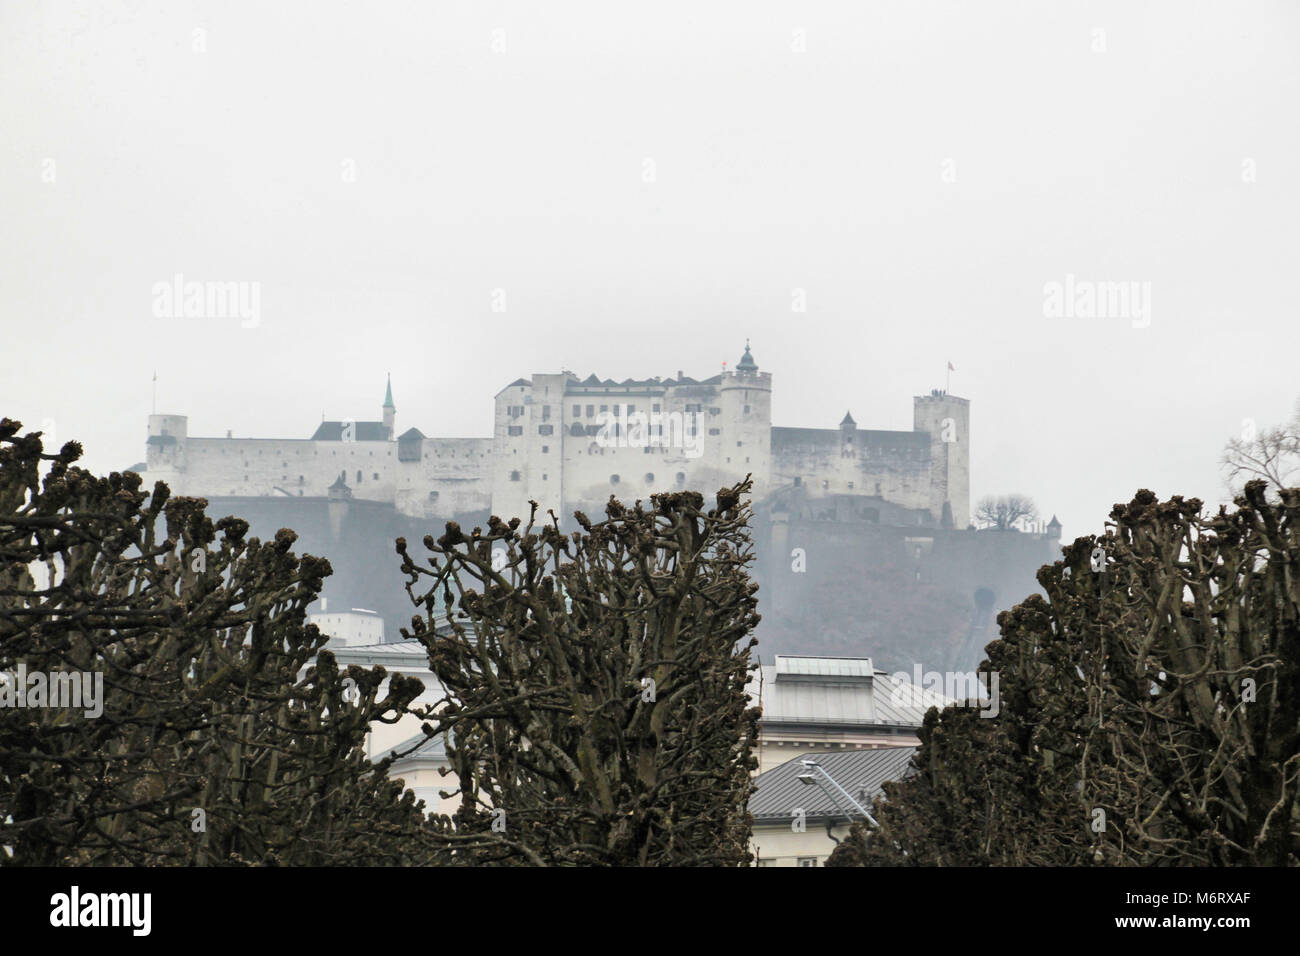 A view of Salzburg Castle in the mist Stock Photo